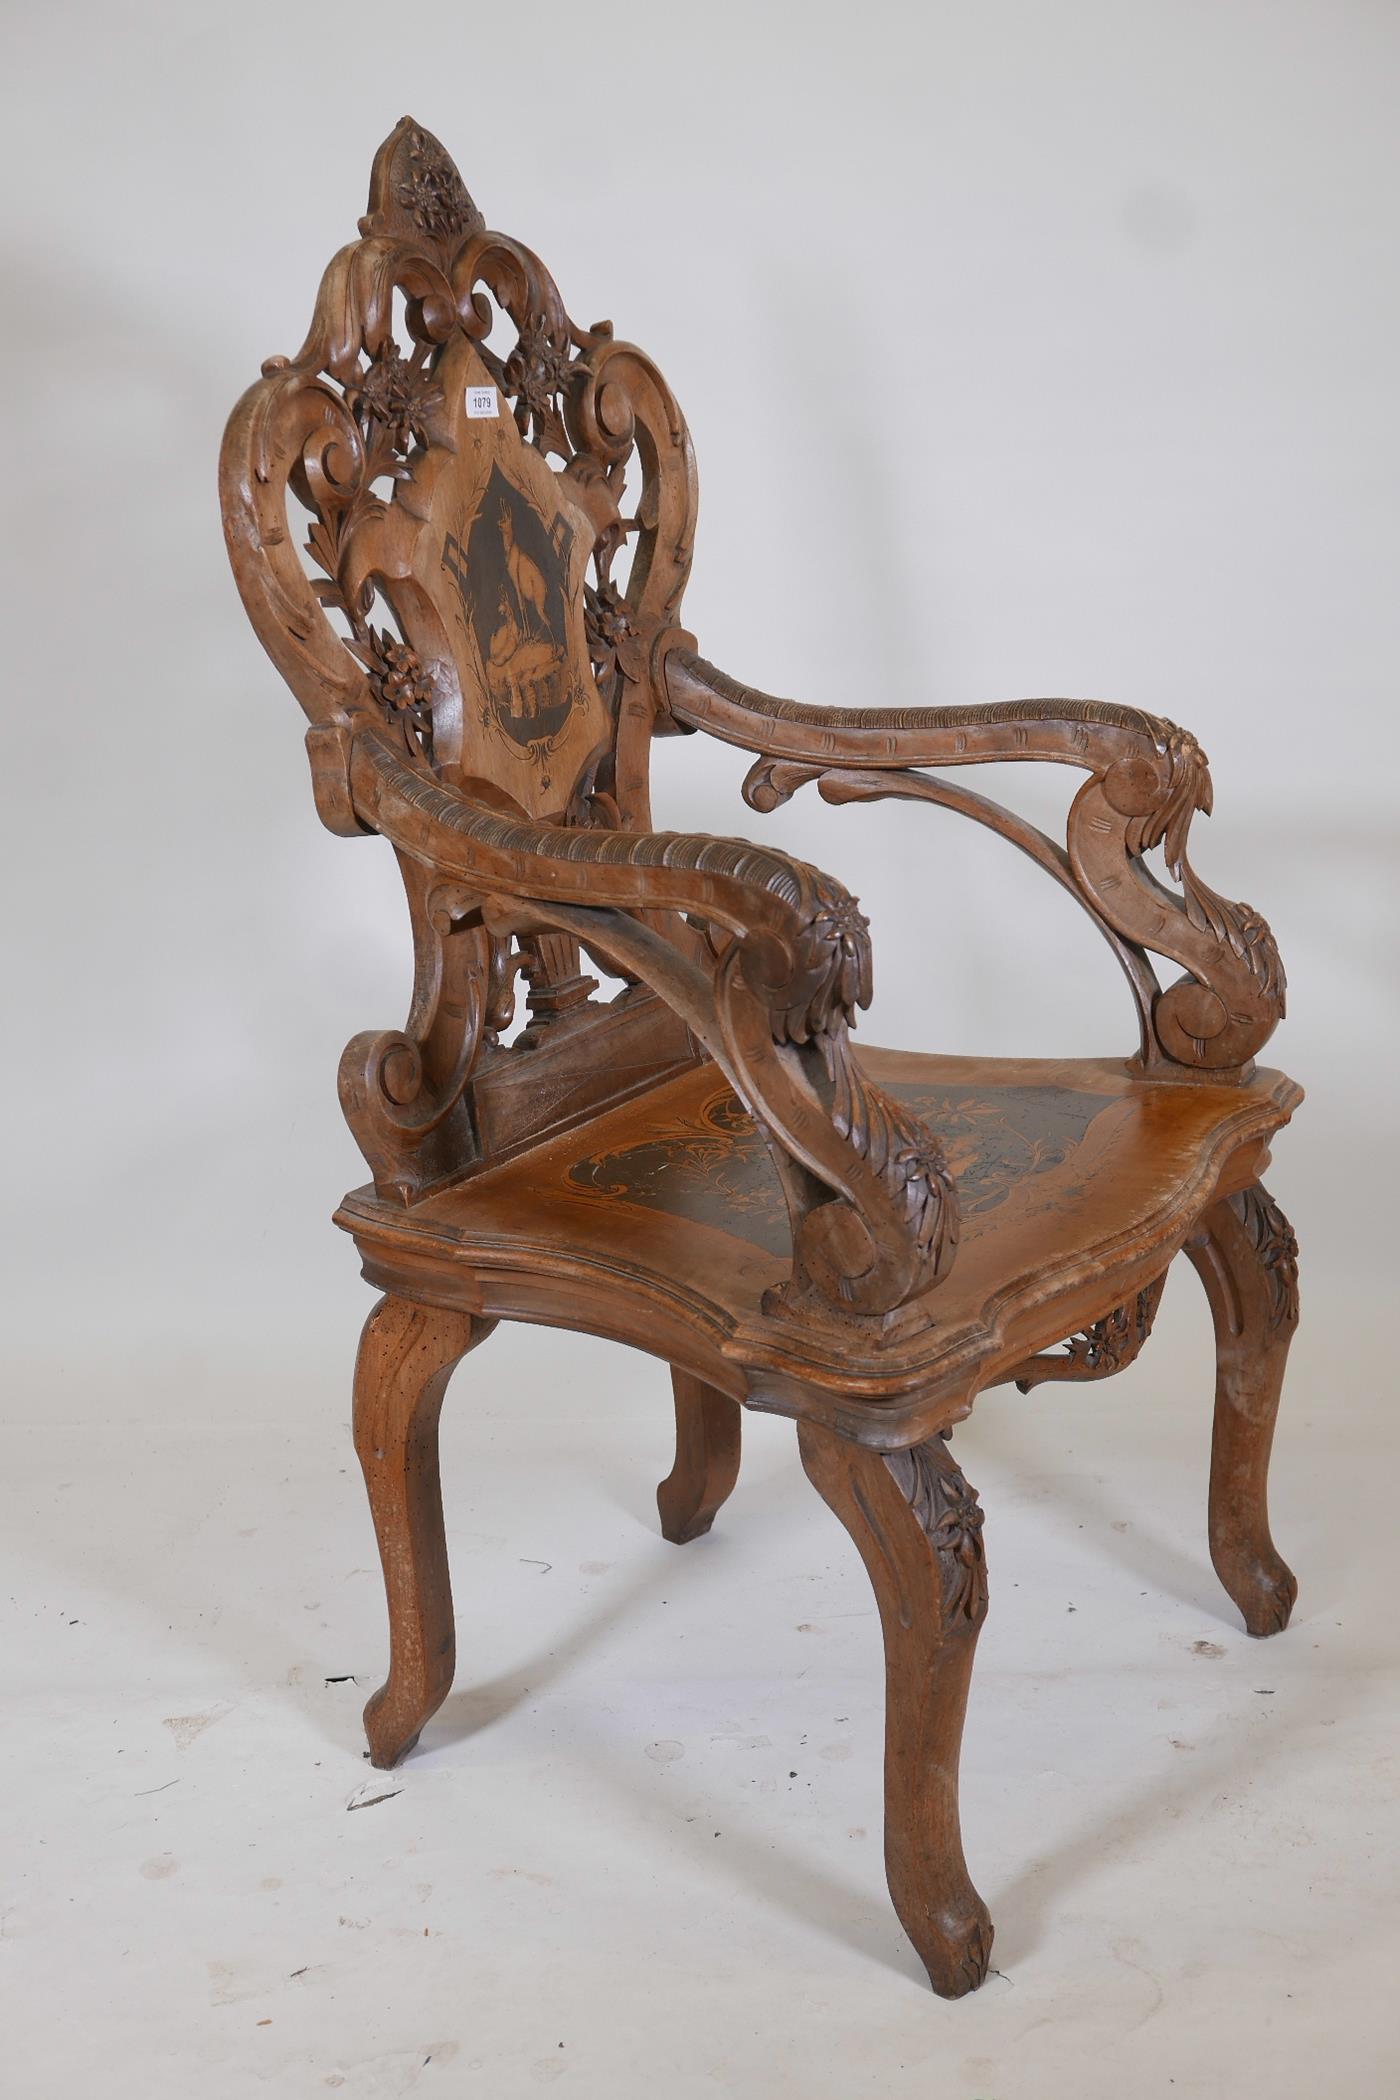 A C19th Swiss inlaid walnut musical open armchair with carved and pierced back and arms, 47½" high - Image 3 of 10